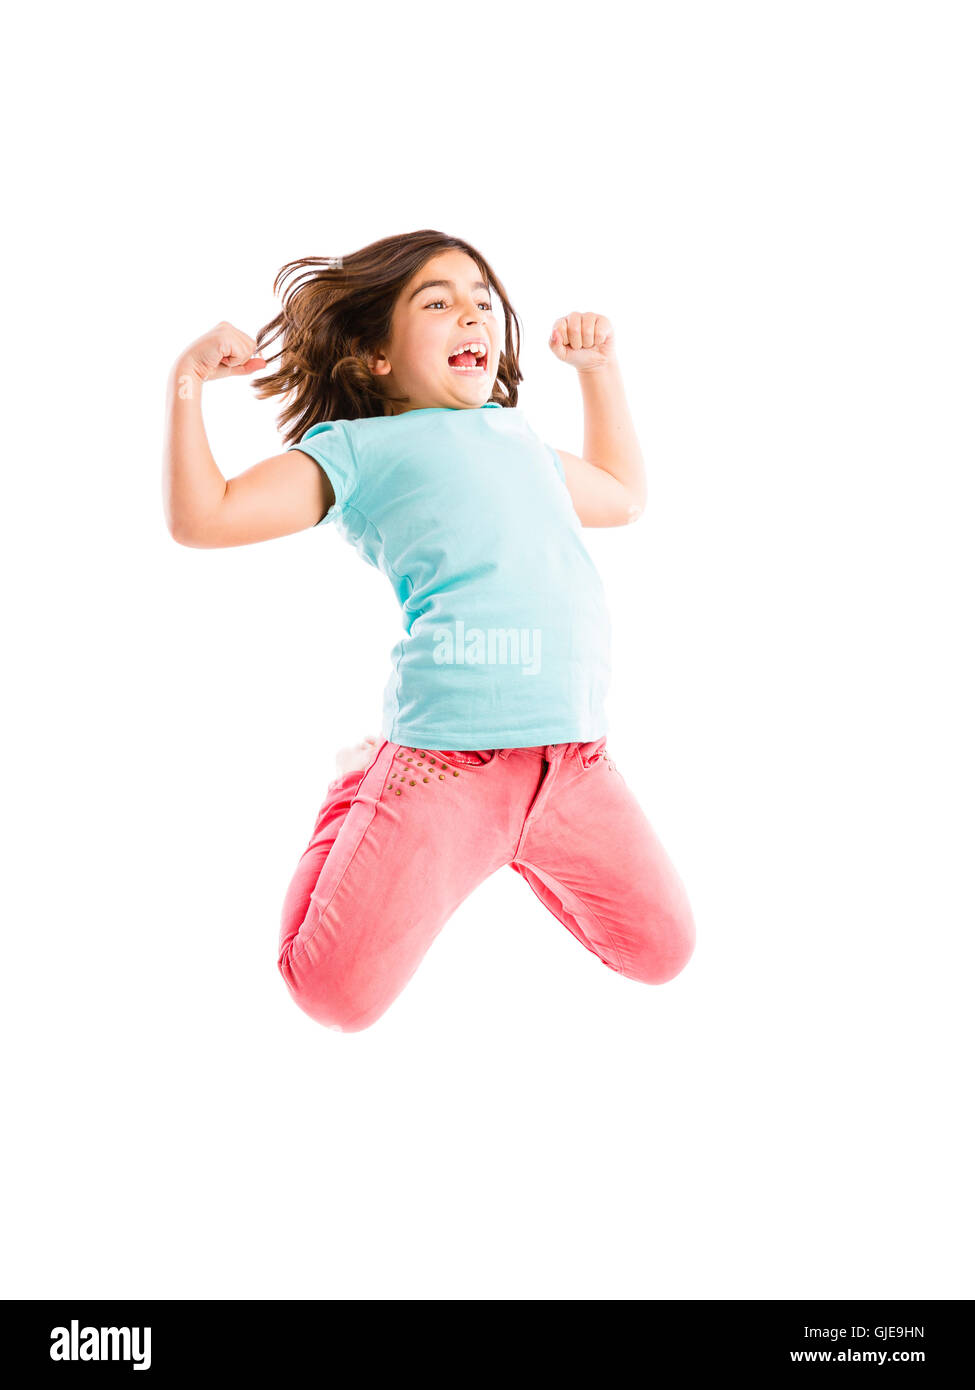 Beautiful and happy young girl jumping Stock Photo